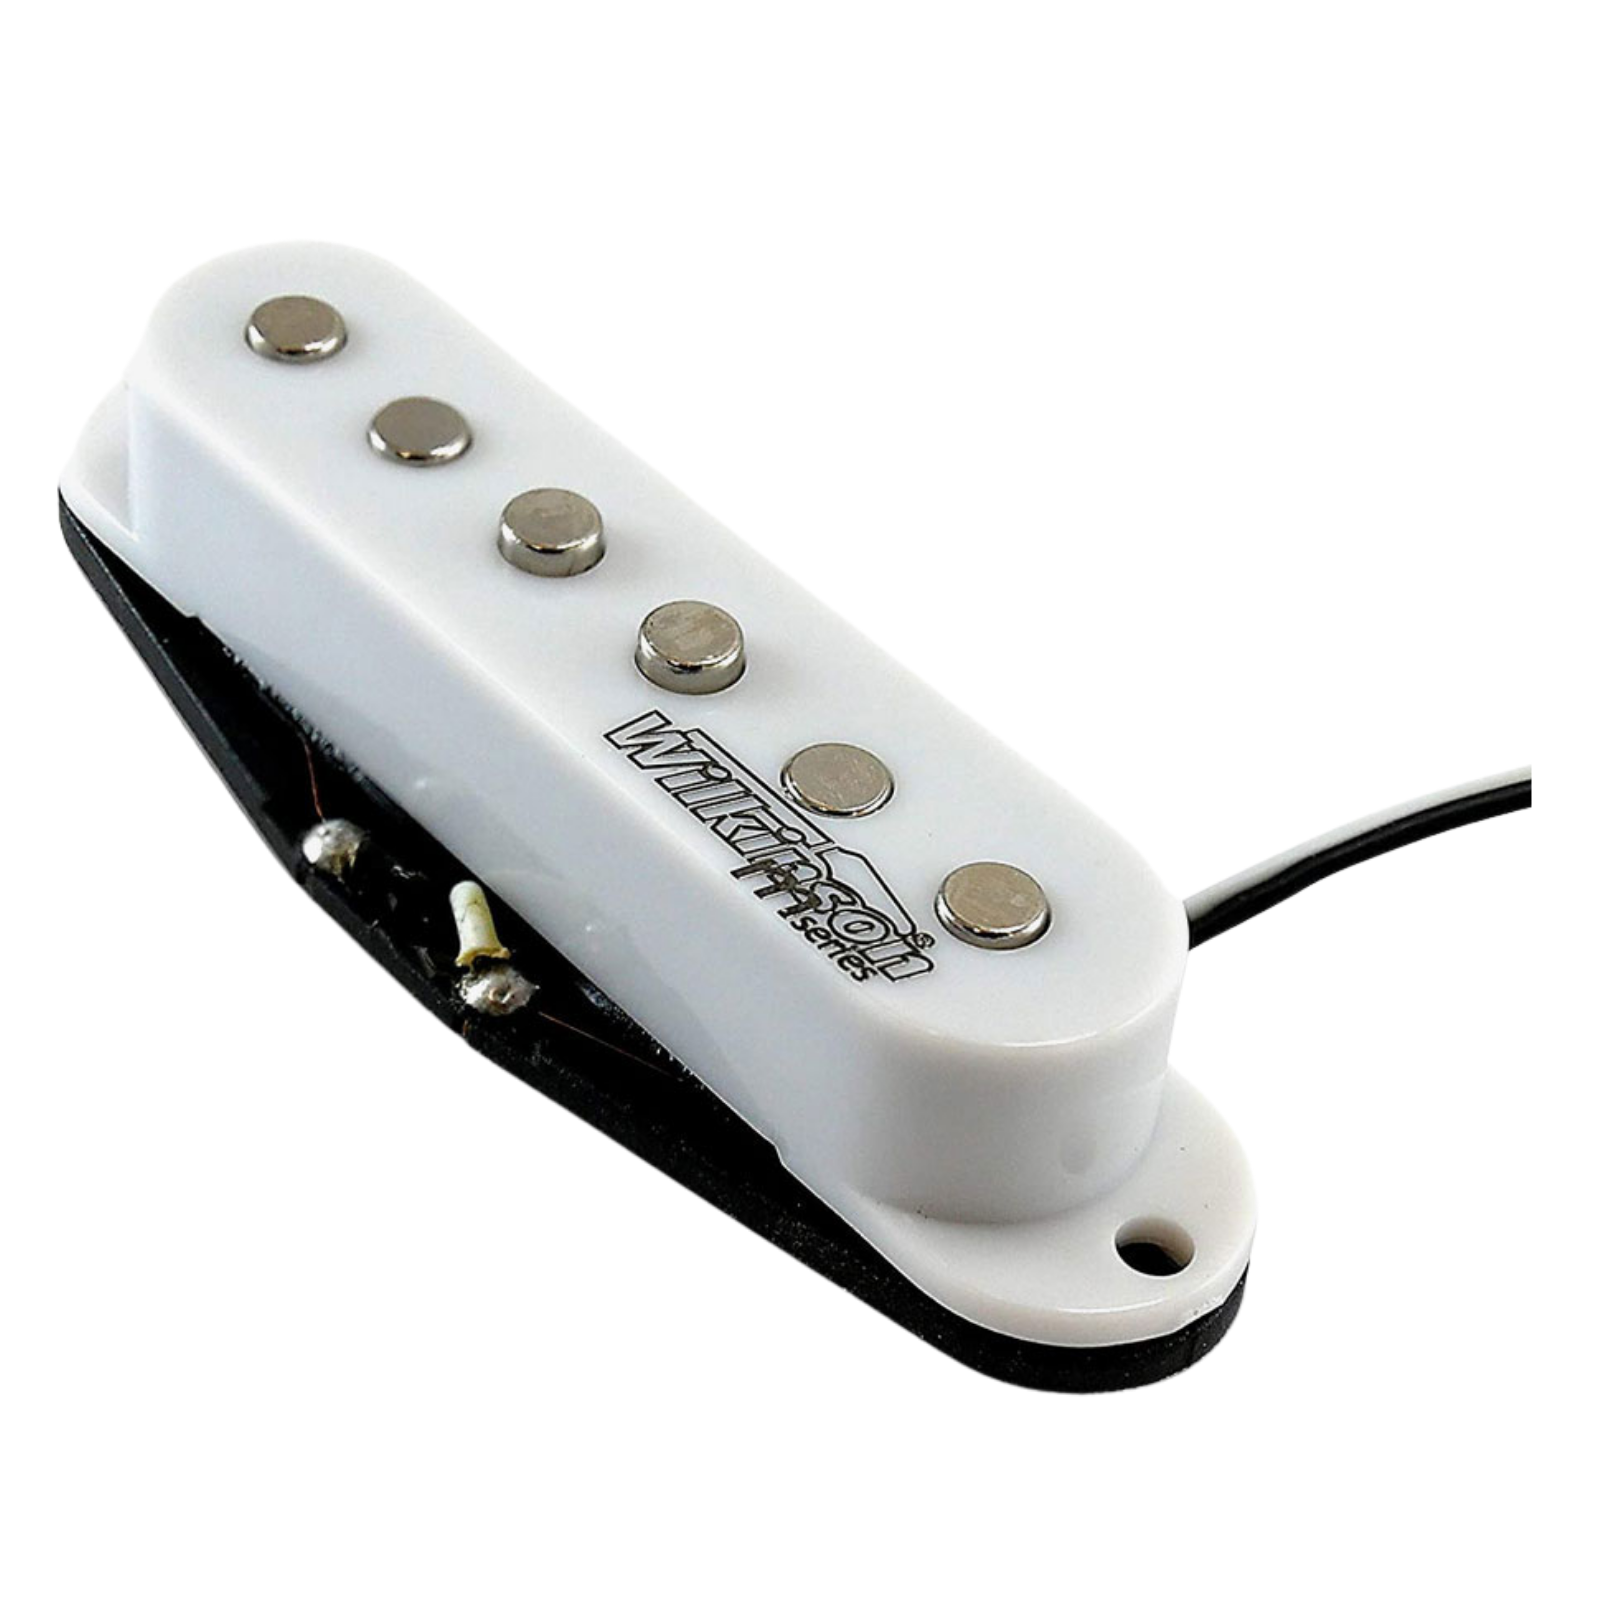 WILKINSON PICKUPS MIDDLE SINGLE COIL WITH LOWGAUSS CERAMIC COLOR WHITE FOR STRATOCASTER ELECTRIC GUITAR, WILKINSON, PICKUPS & PARTS, wilkinson-pickups-parts-wovsm, ZOSO MUSIC SDN BHD